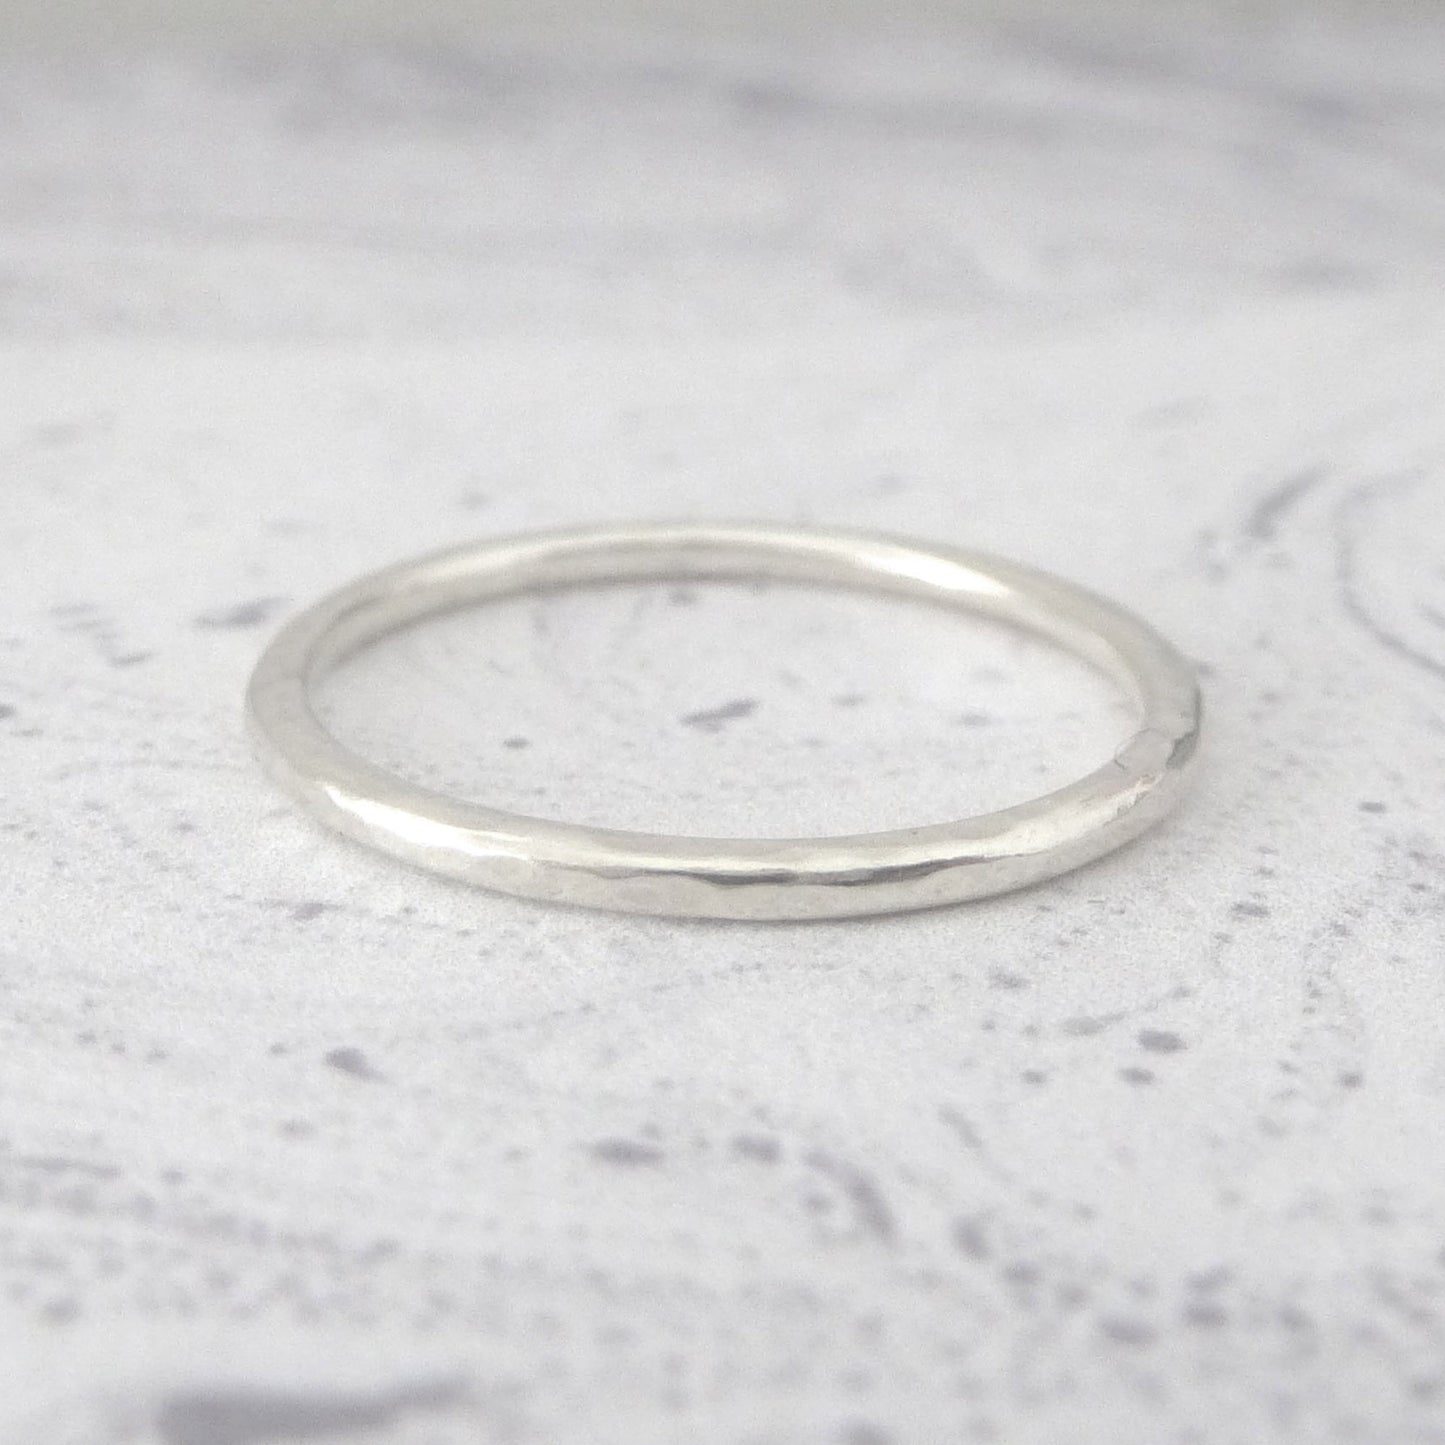 Elegant Band Ring in Sterling Silver - 1.5mm - Hammered or Smooth